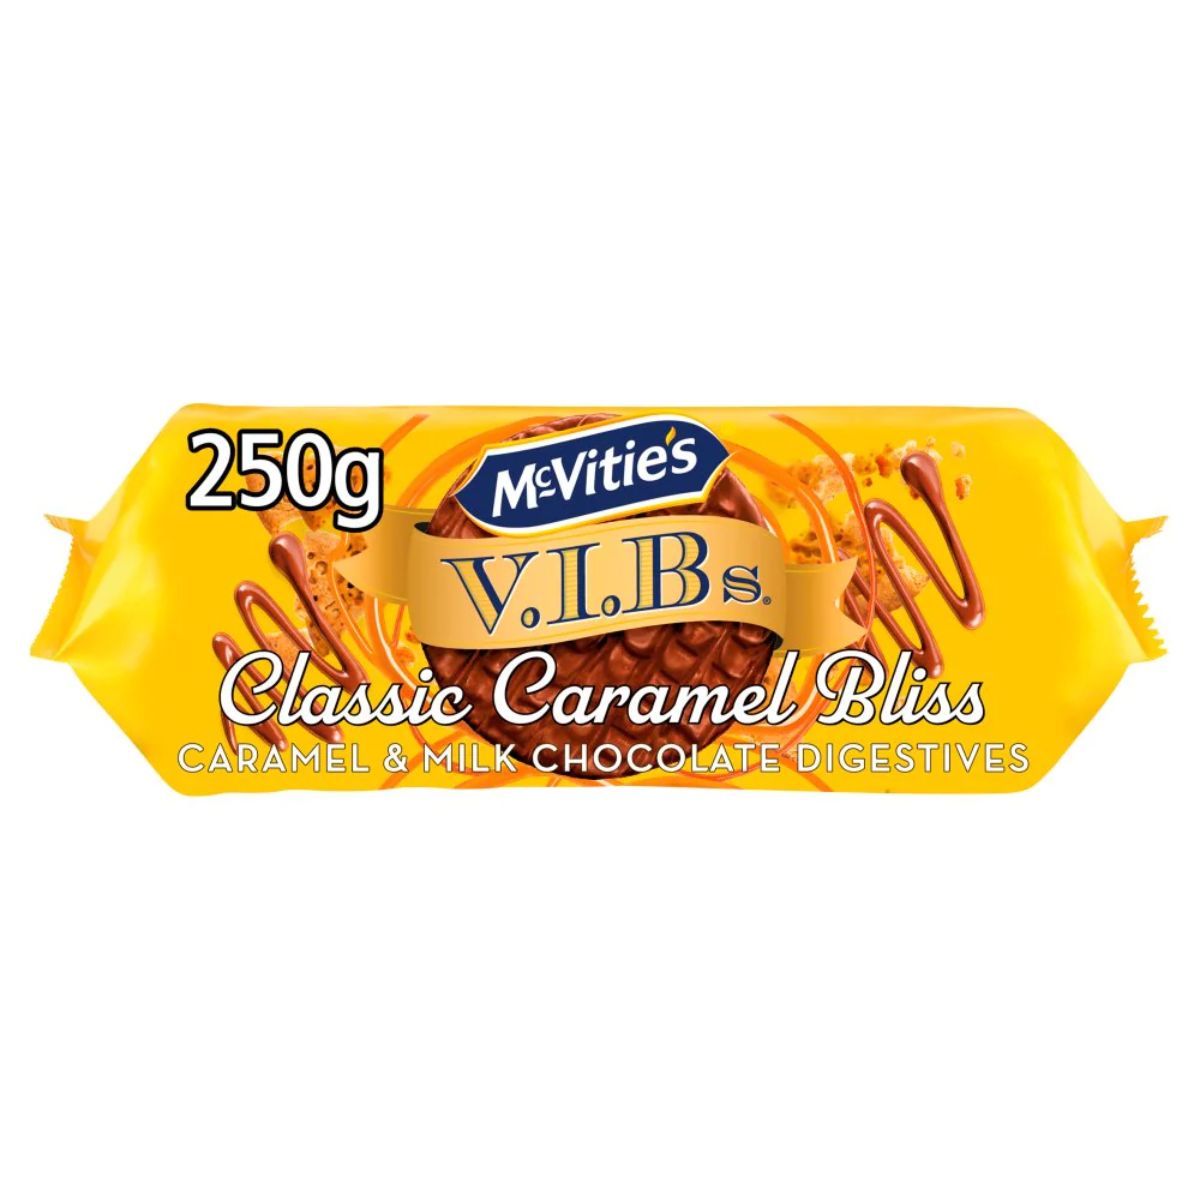 McVities - V.I.B's Caramel Bliss Biscuits - 250g.